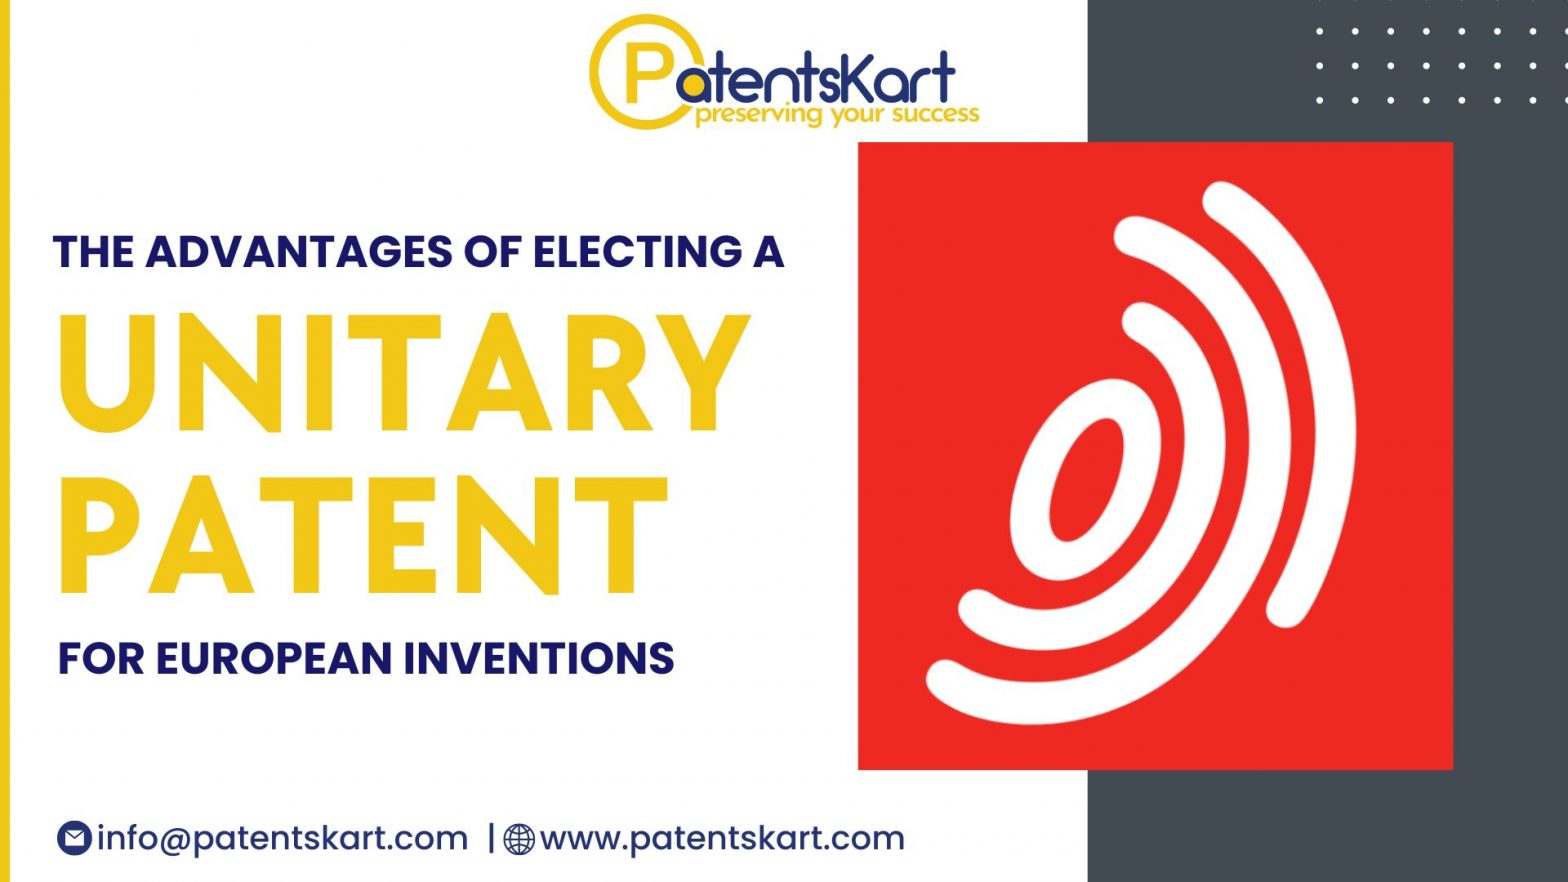 Unitary Patent, European inventions, Unified Patent Court, UPC, cost savings, streamlined management, enforcement options